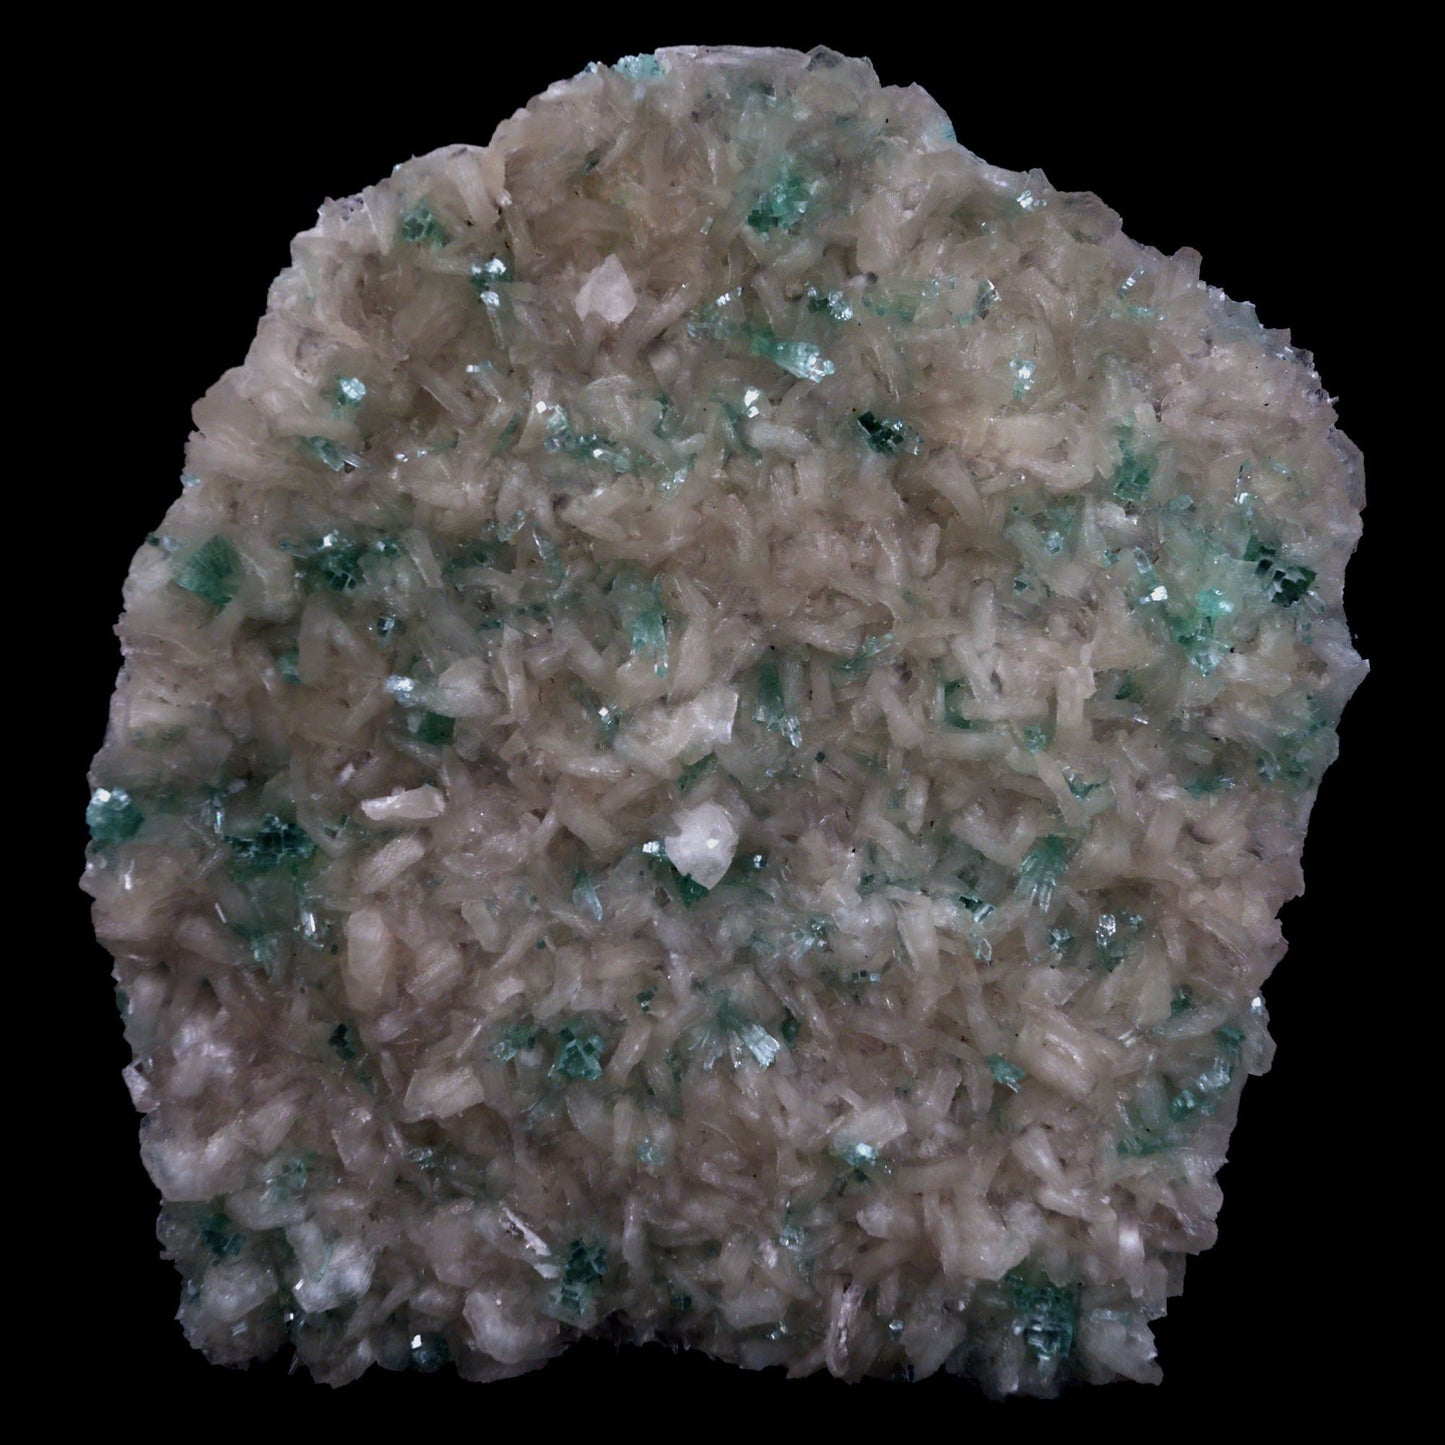 Green Apophyllite with Stilbite, Powellite Rare Find Natural Mineral S…  https://www.superbminerals.us/products/green-apophyllite-sprakling-crystals-with-stilbite-natural-mineral-specimen-b-4767  Features: We have a striking crystal perched elegantly in apophyllite and stilbite crystal nests that are elongated and dramatic! This is a noteworthy specimen in terms of the powellite's own size and the combination's overall appearance. The crystal is a double-terminated, transparent, satiny powellite crystal 